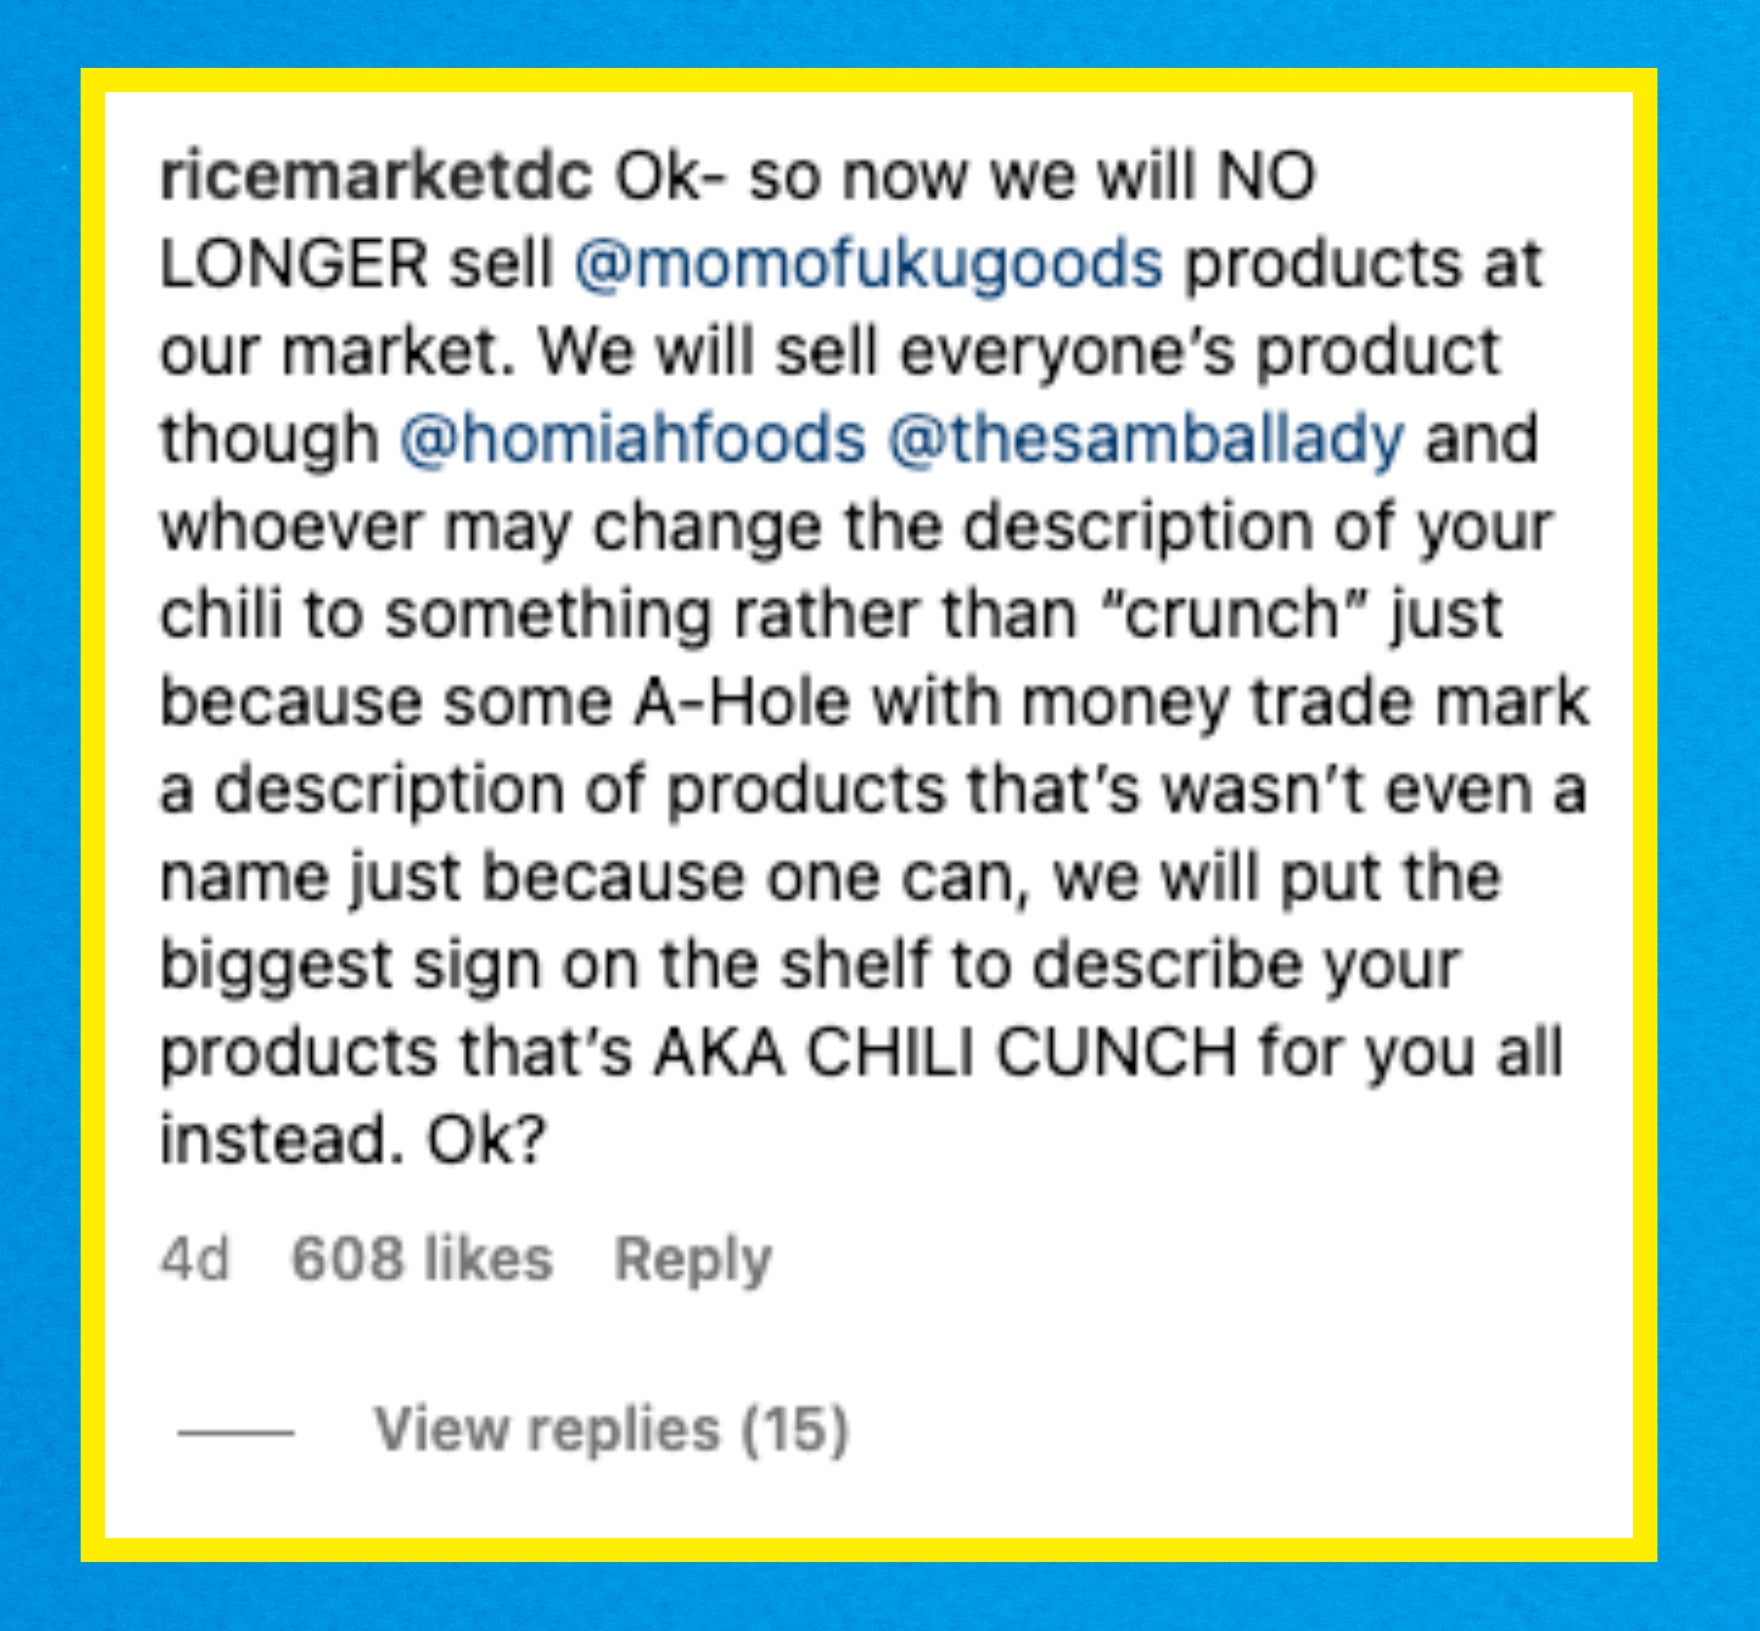 Summarized text from an Instagram comment about an Asian grocer no longer carrying Momofuku products